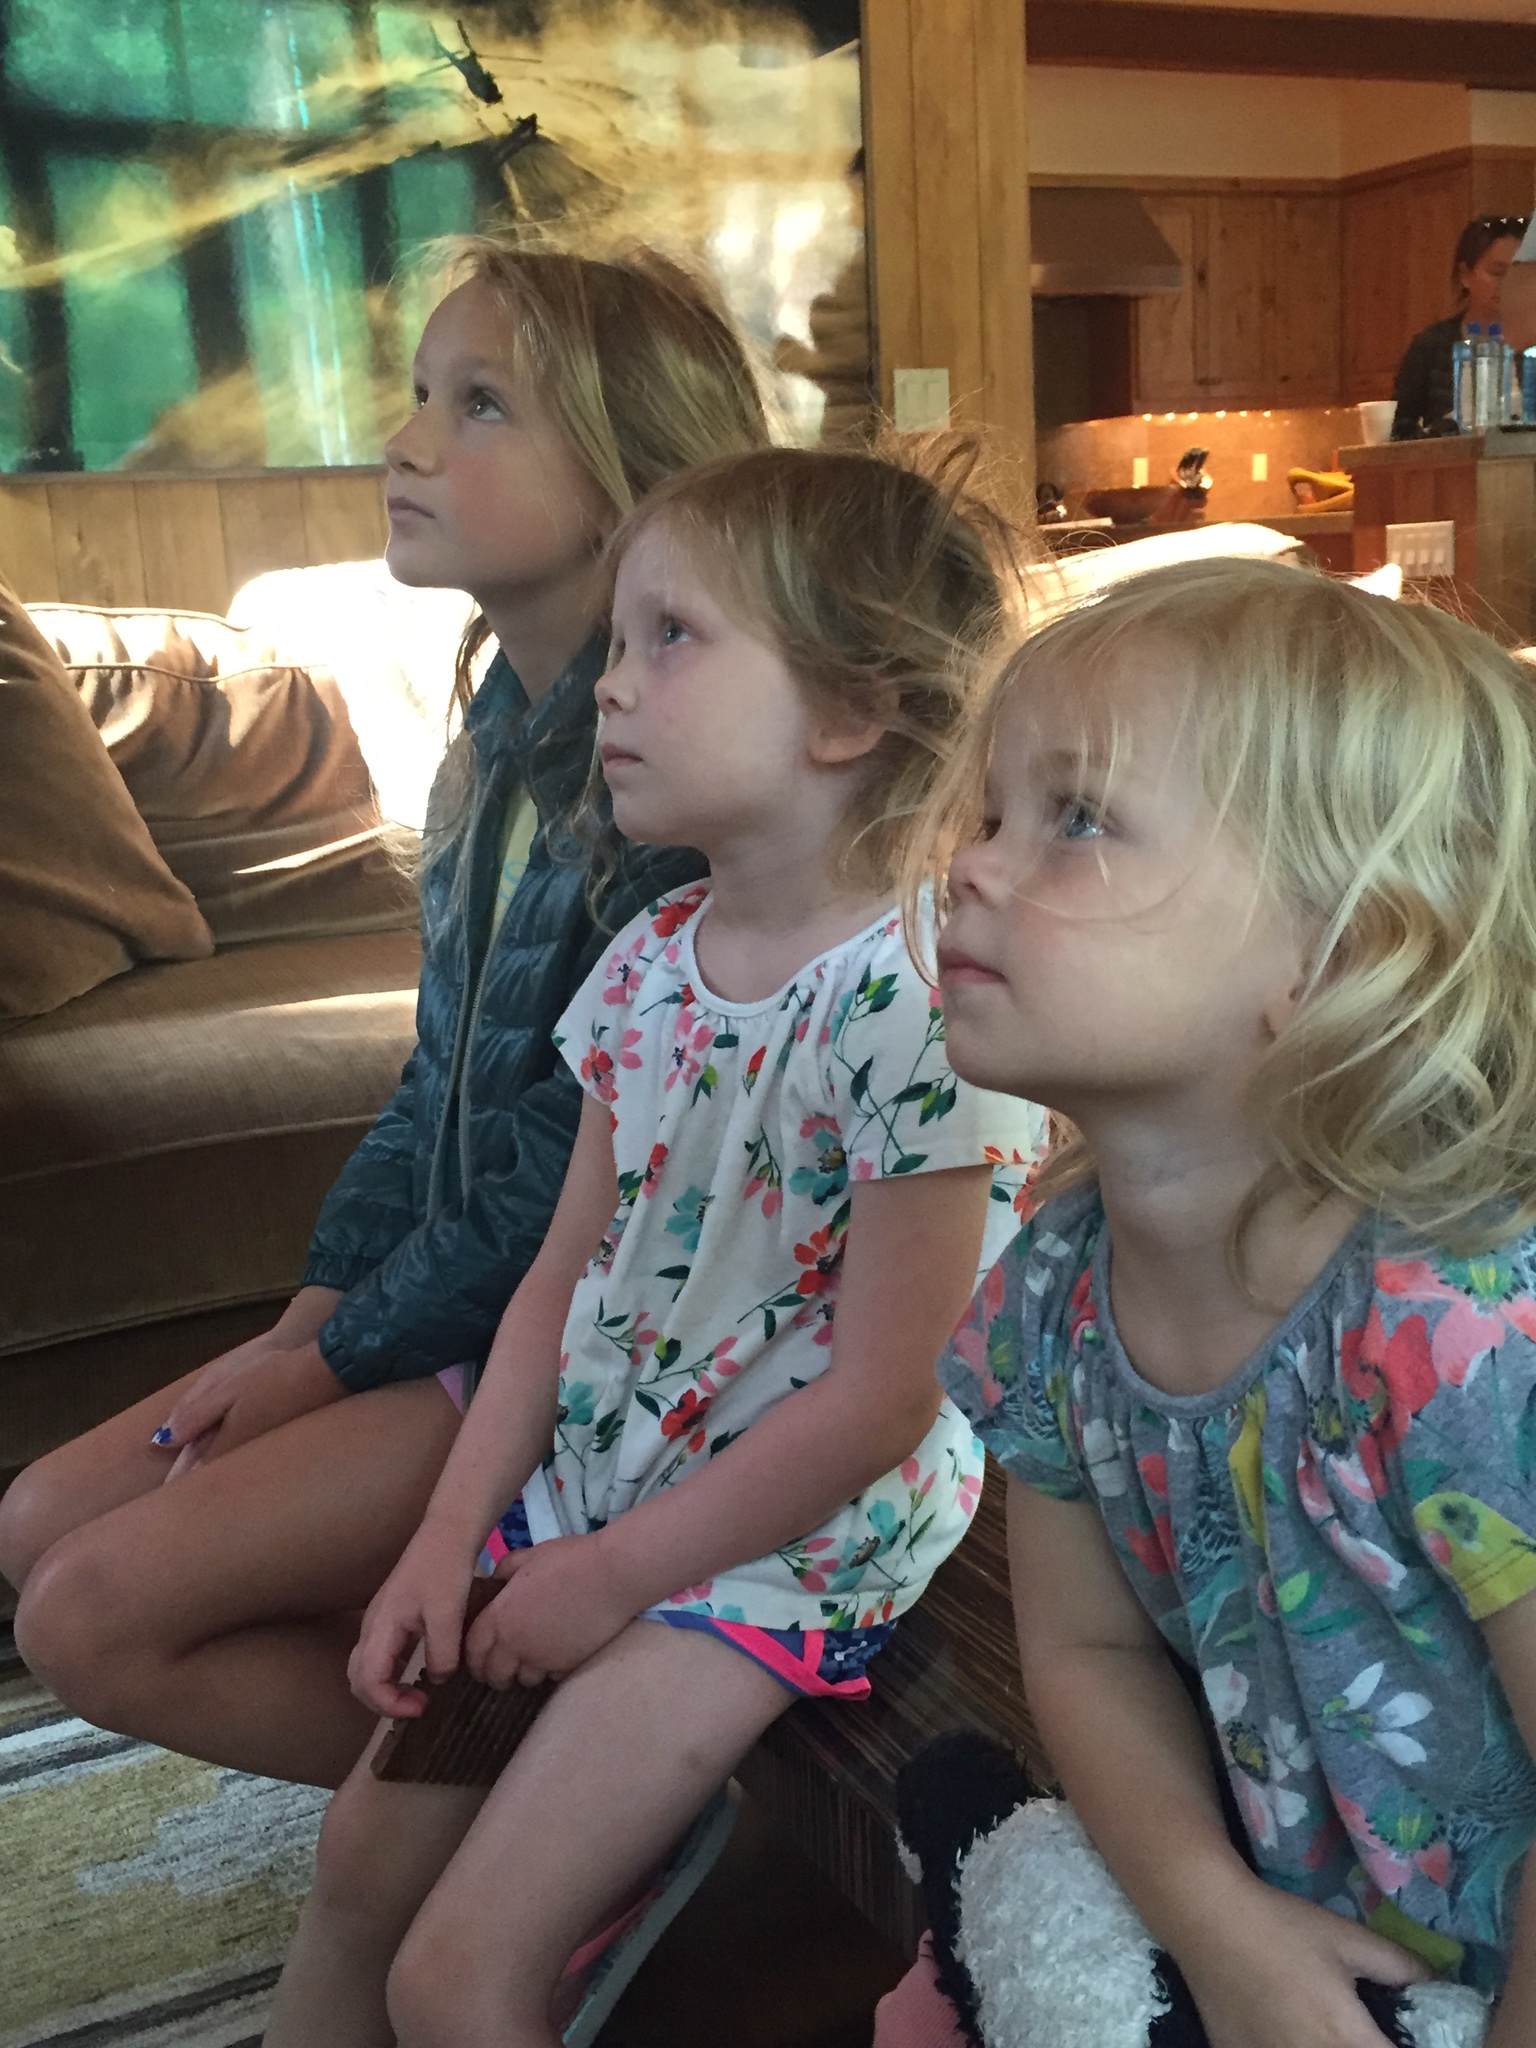 Three young girls watch Hillary Clinton accept the Democratic nomination.